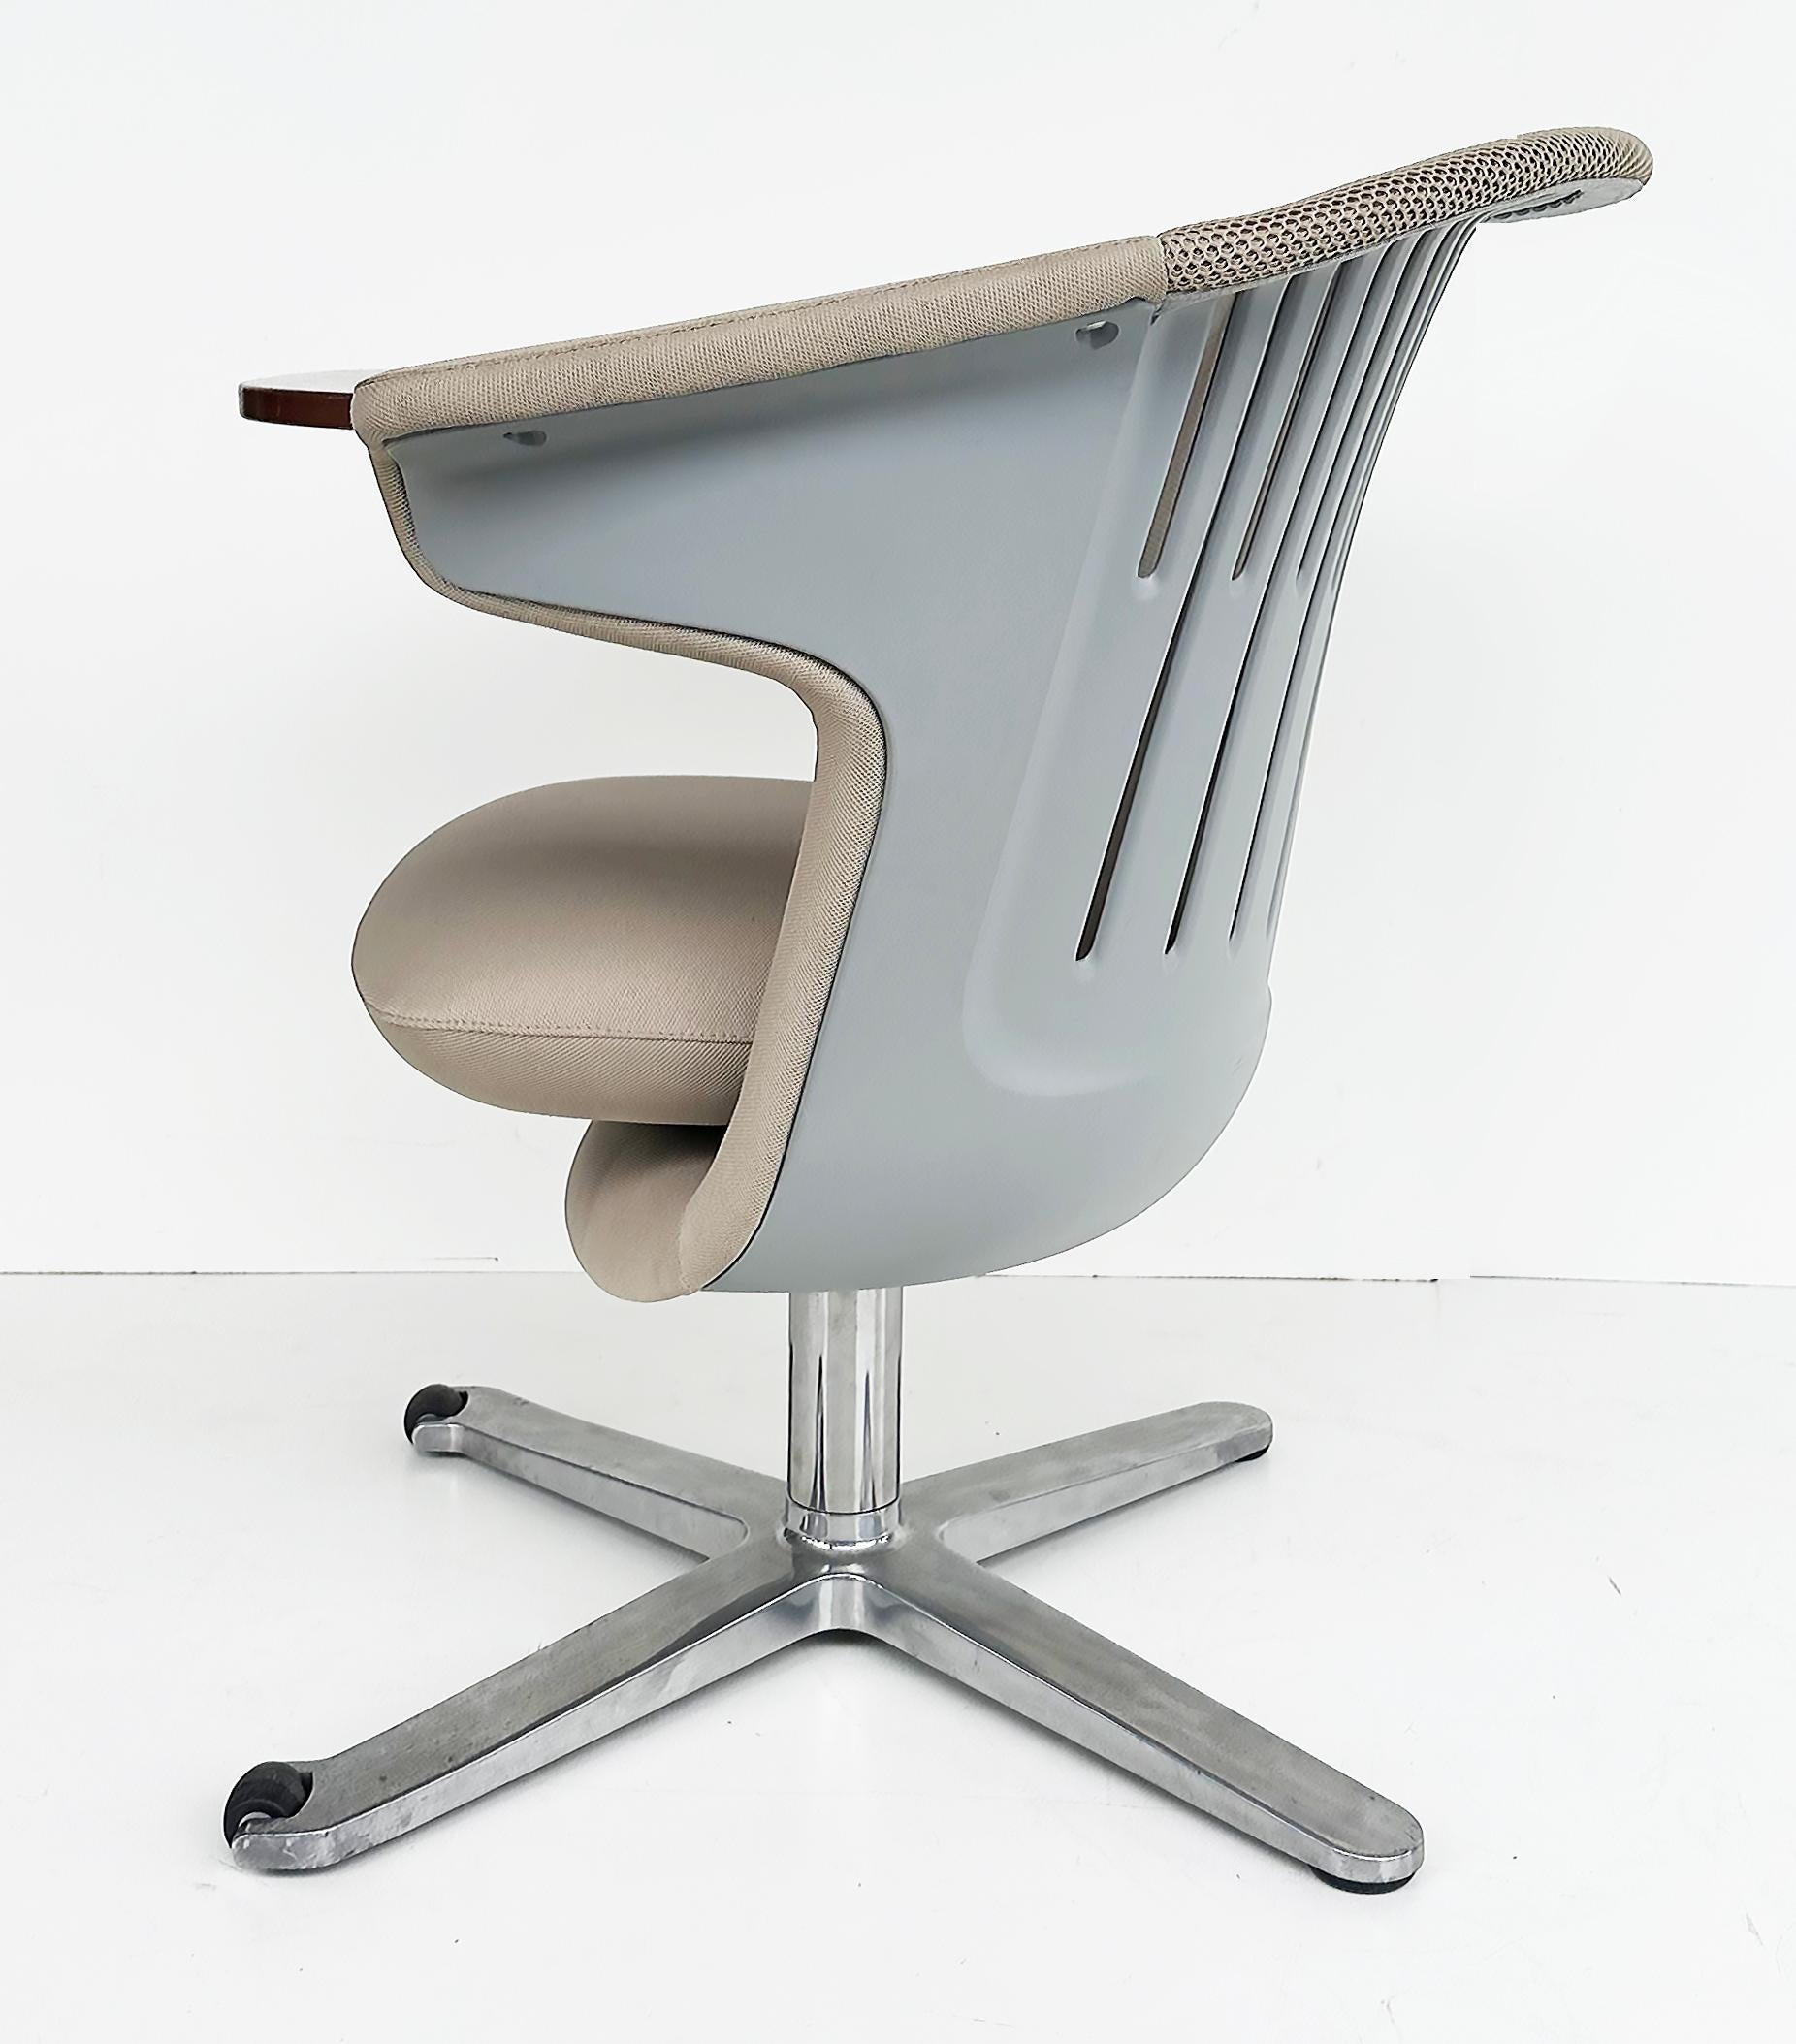 Metal Steelcase i2i Ergonomic Dual Swivel Graphite Lounge Chair with Writing Tablet For Sale